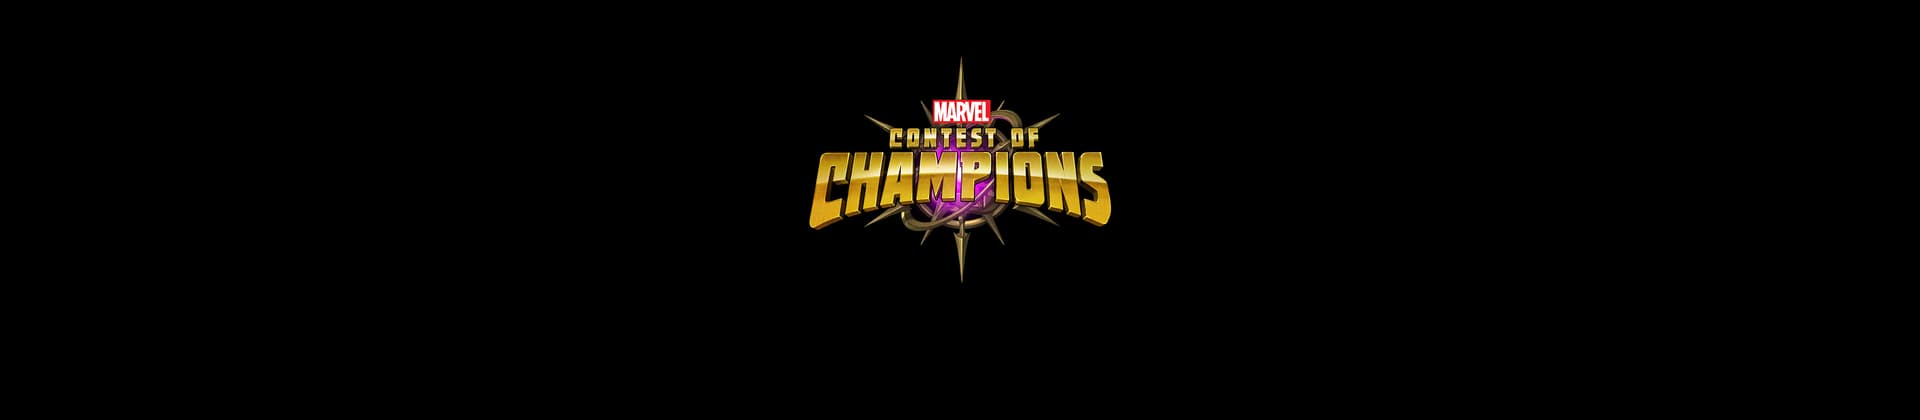 Marvel's Contest of Champions Game Logo on Black